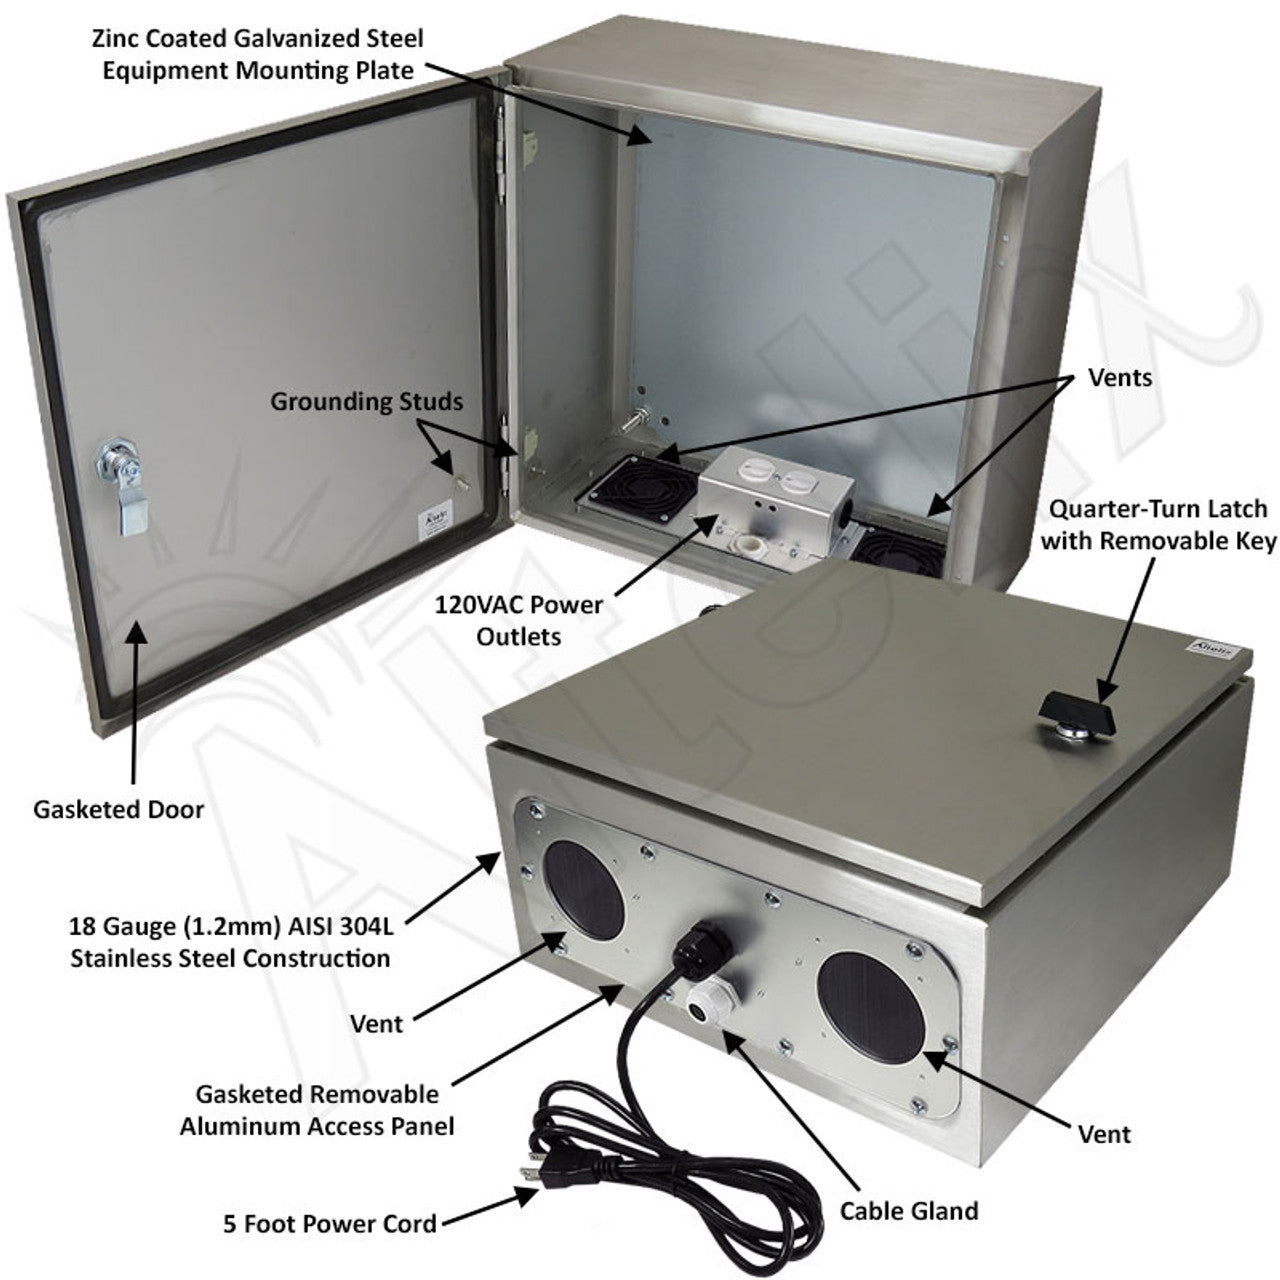 Altelix Vented Stainless Steel Weatherproof NEMA Enclosure with 120 VAC Outlets and Power Cord - 0